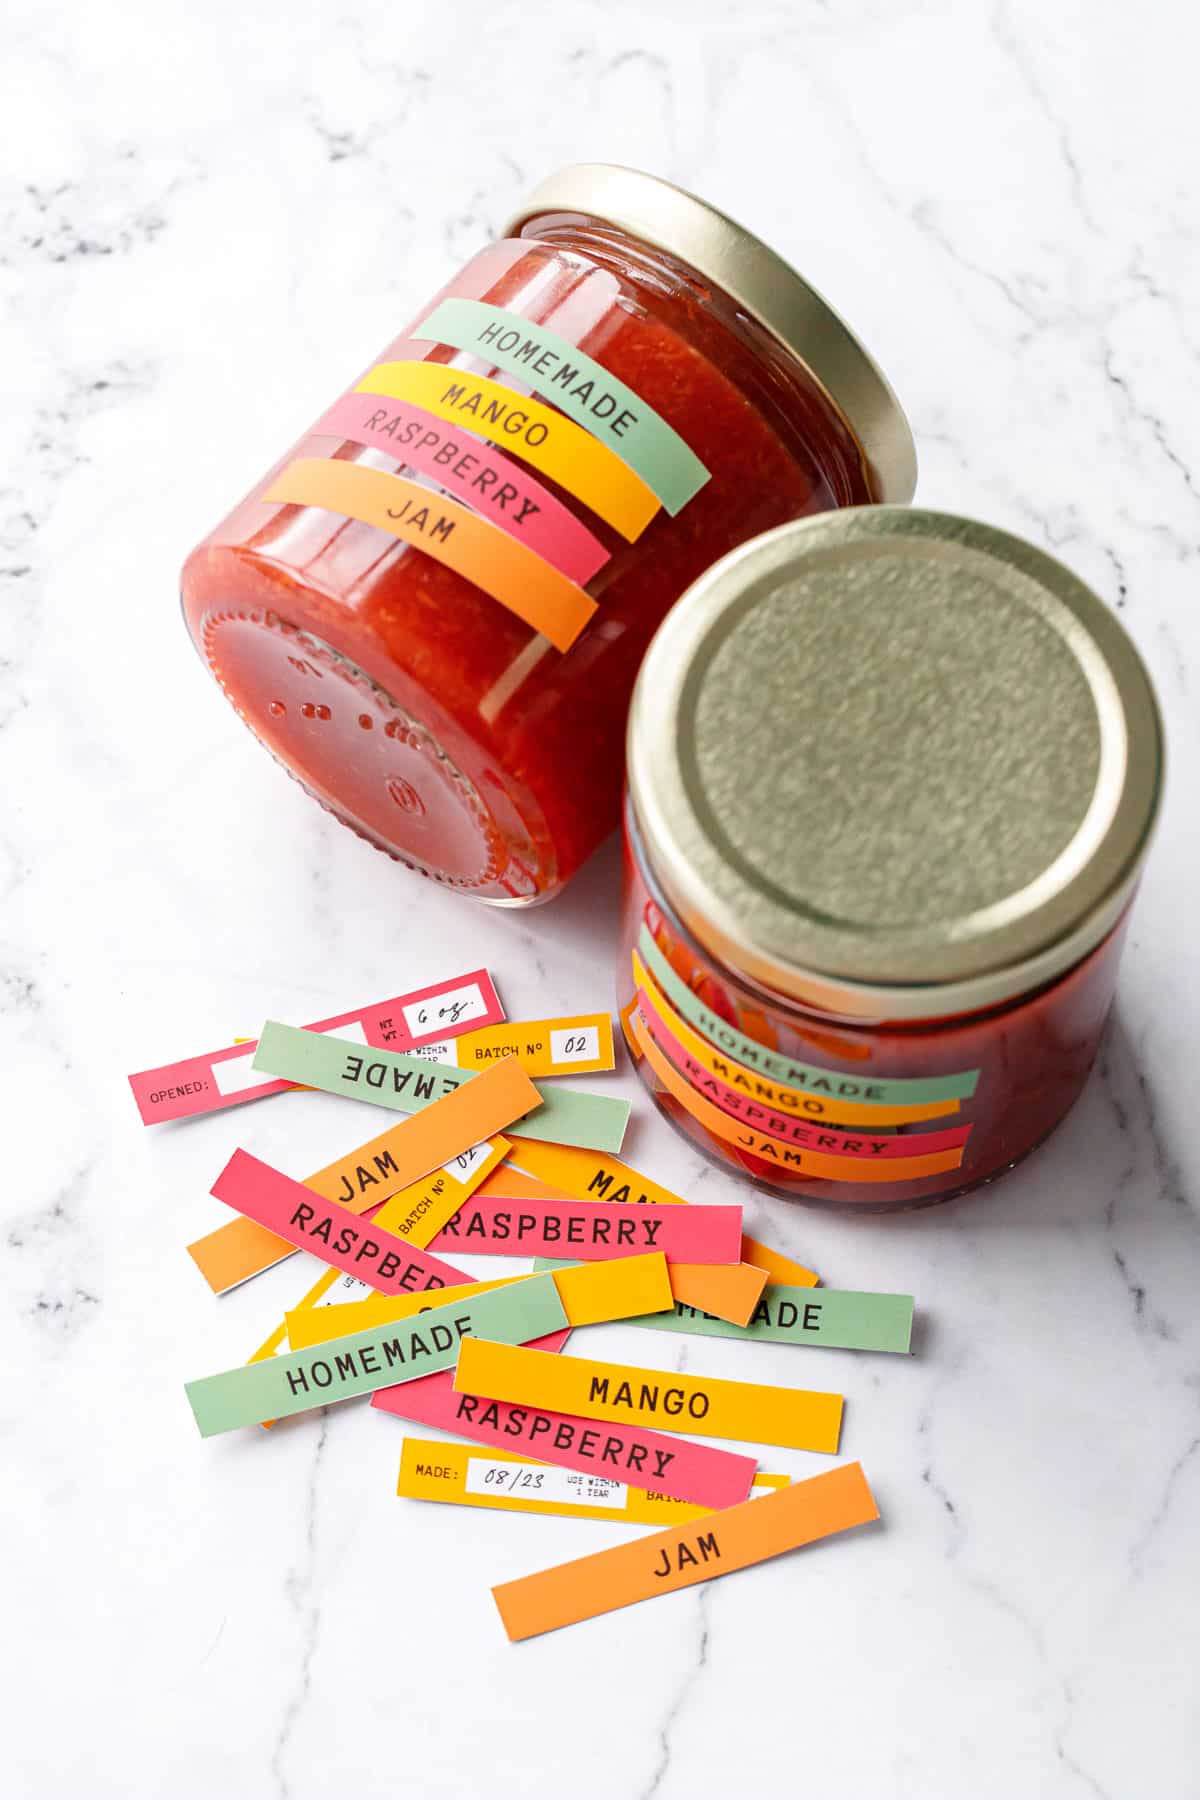 Sealed jars of Mango Raspberry Jam with custom colorful designed printed labels, some labels scattered on the background before being applied to jars.